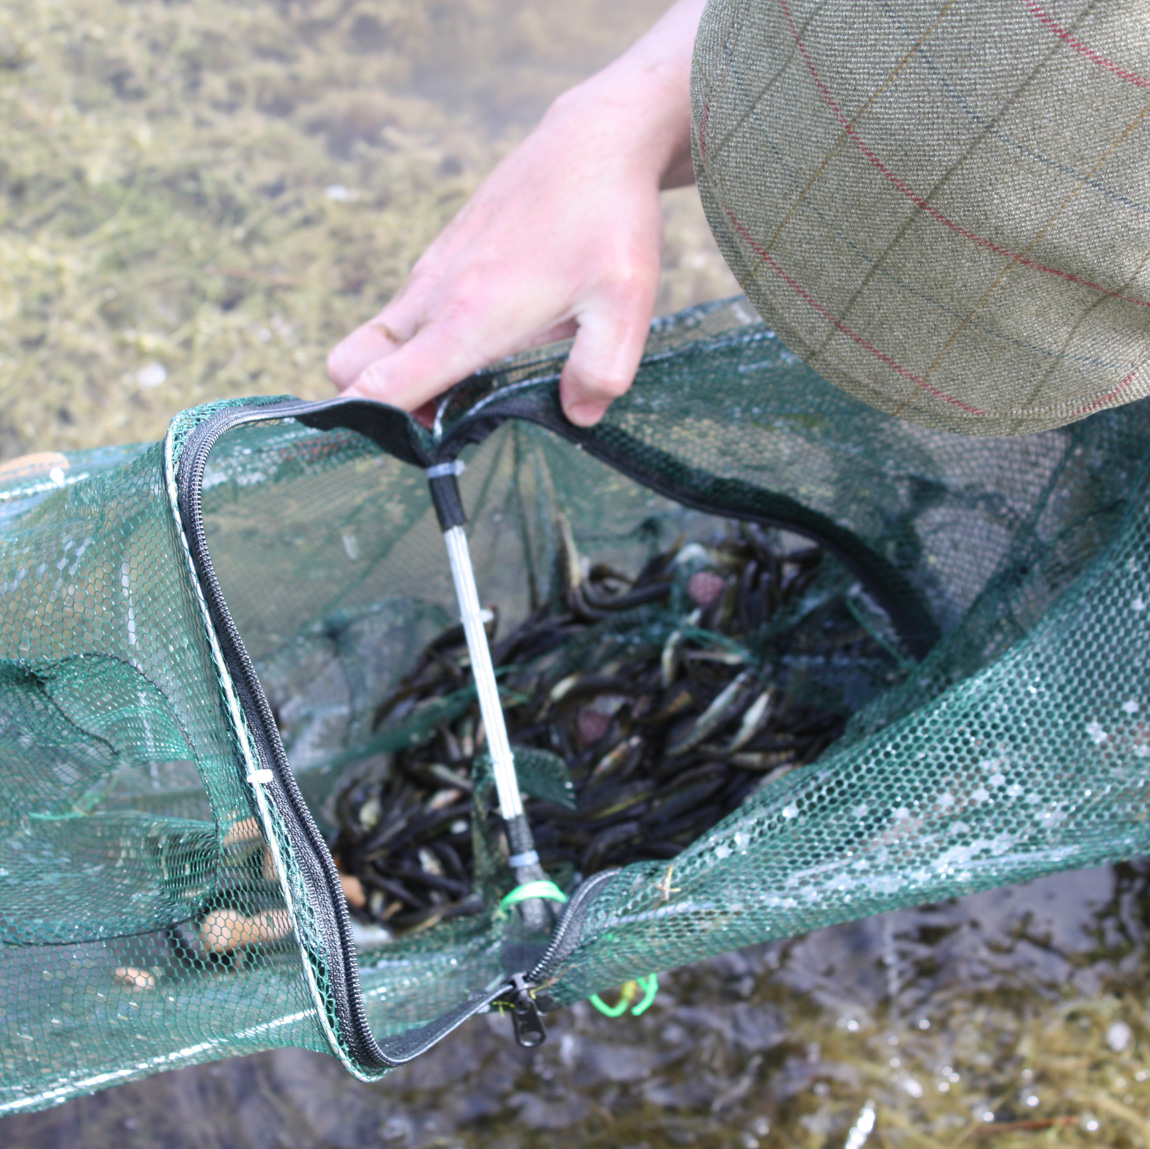 Minnows collected at Pant y Llyn by the Wild Carp Trust